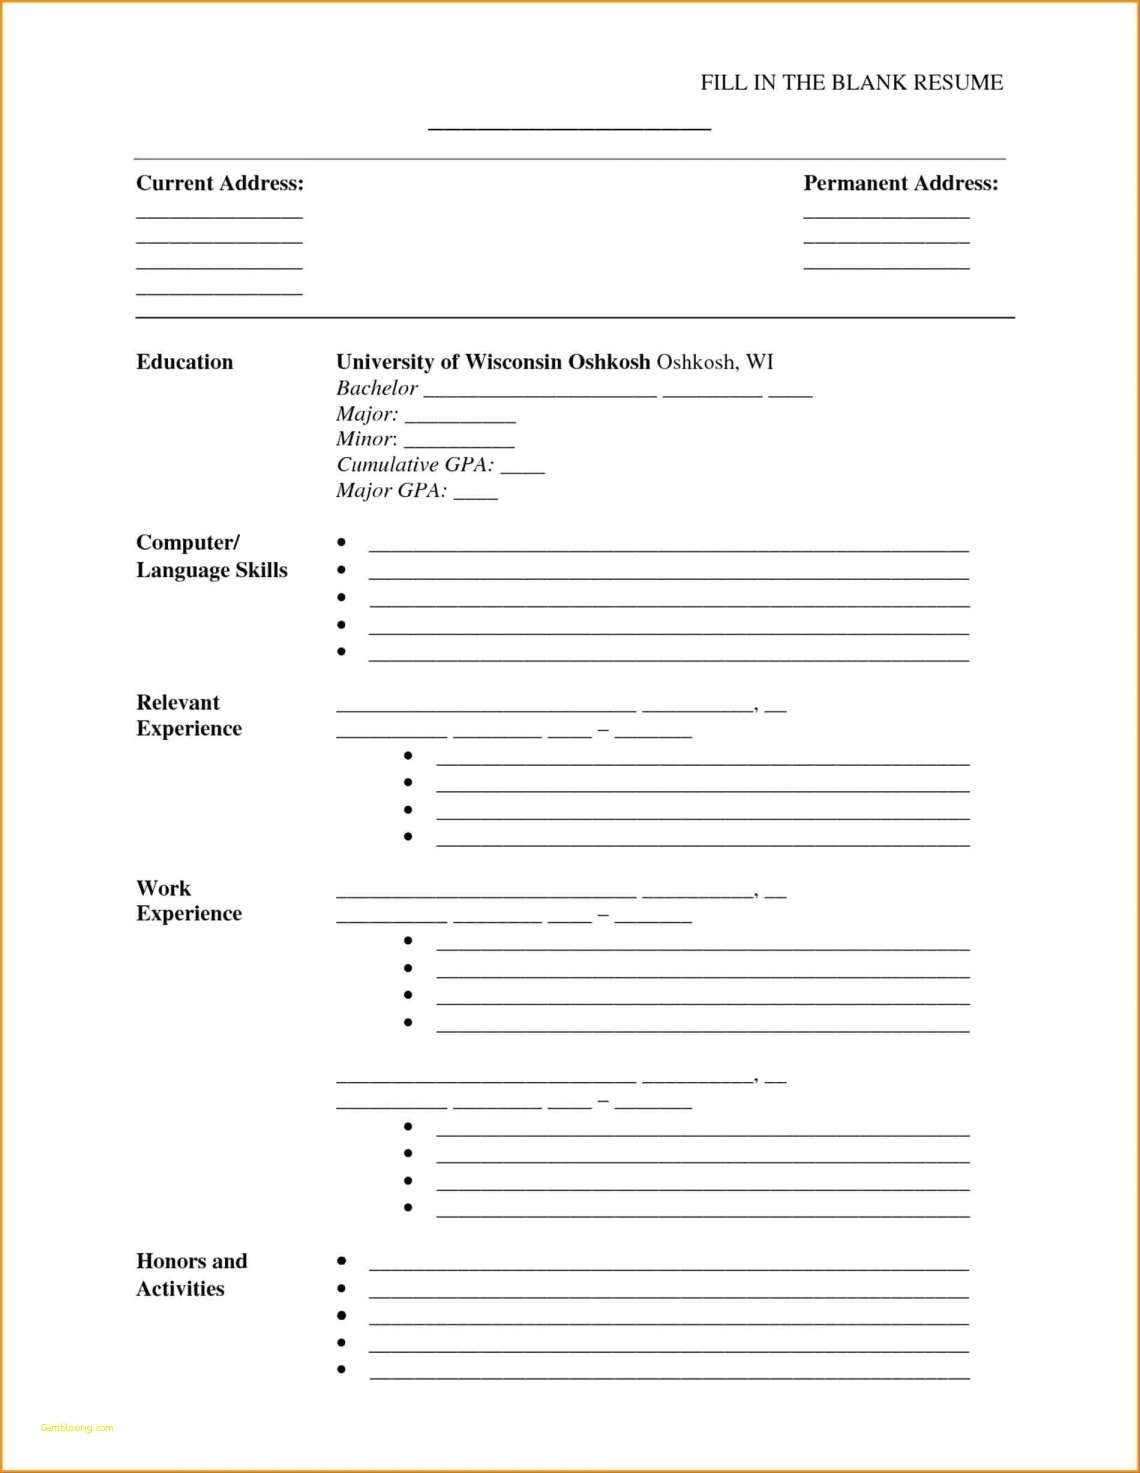 Fill In The Blank Resume Or Fill In The Blank Bio Template  Fill In The Blank Template